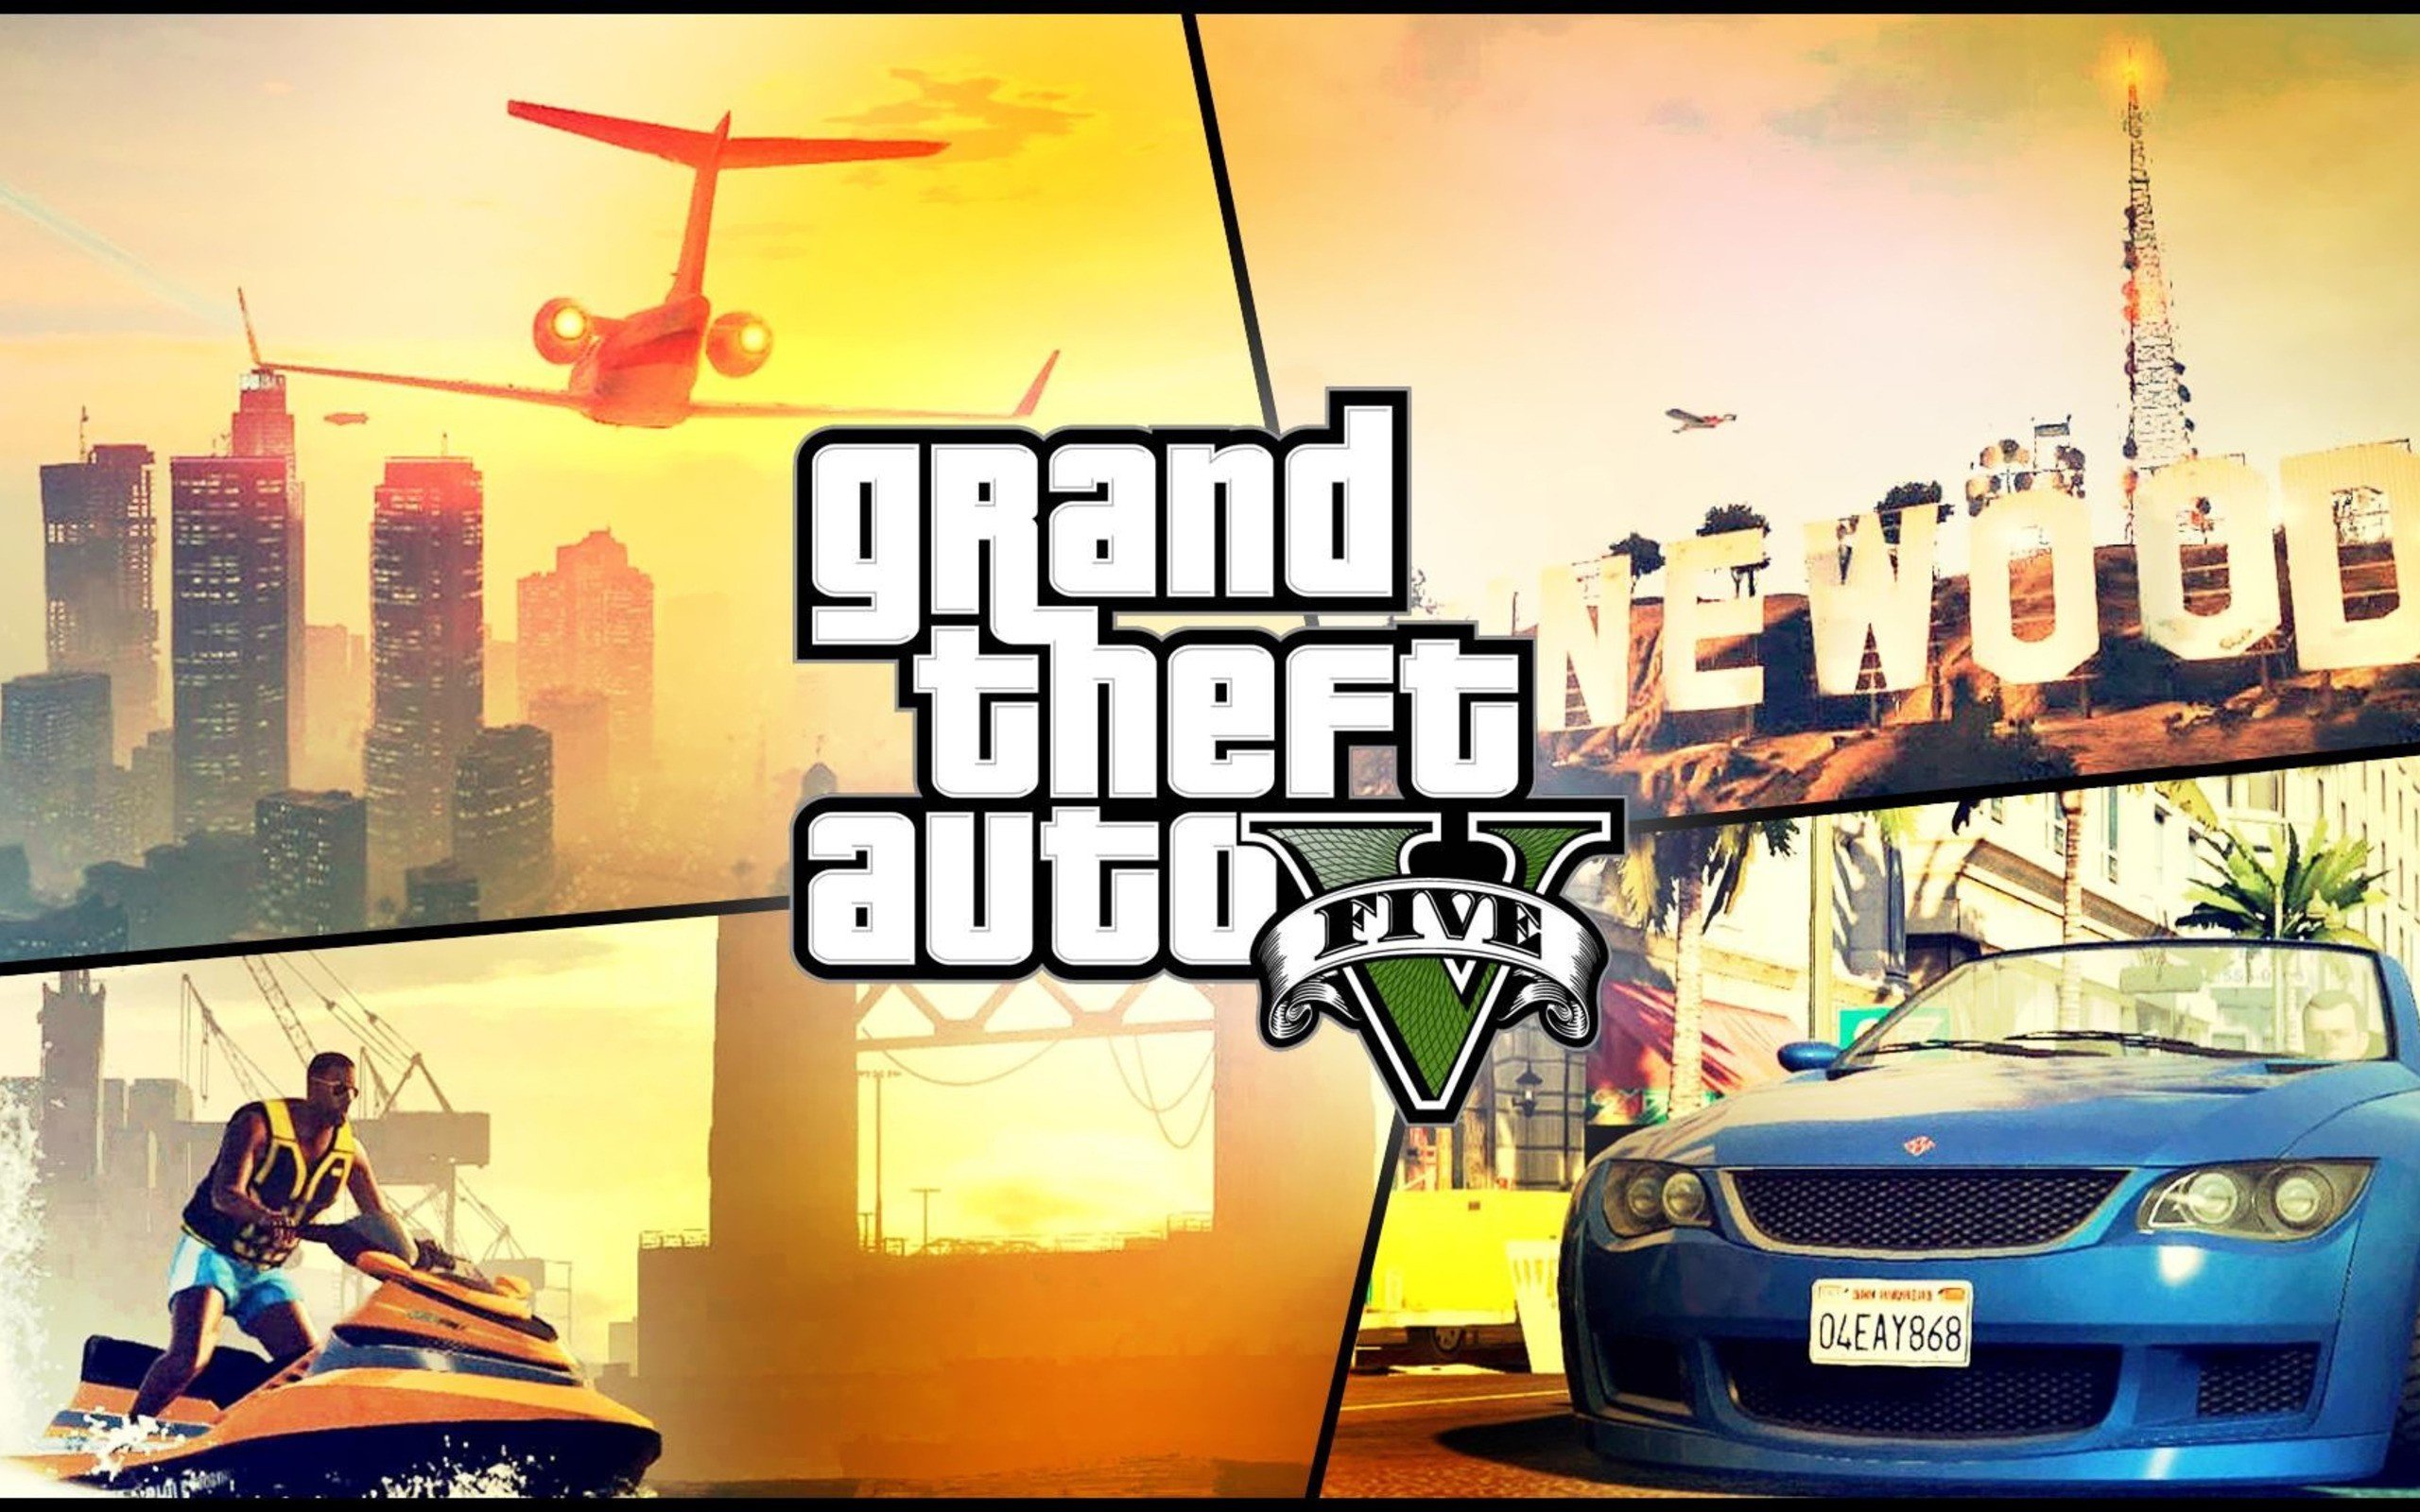 grand-theft-auto-v-grand-theft-auto-wallpapers-hd-desktop-and